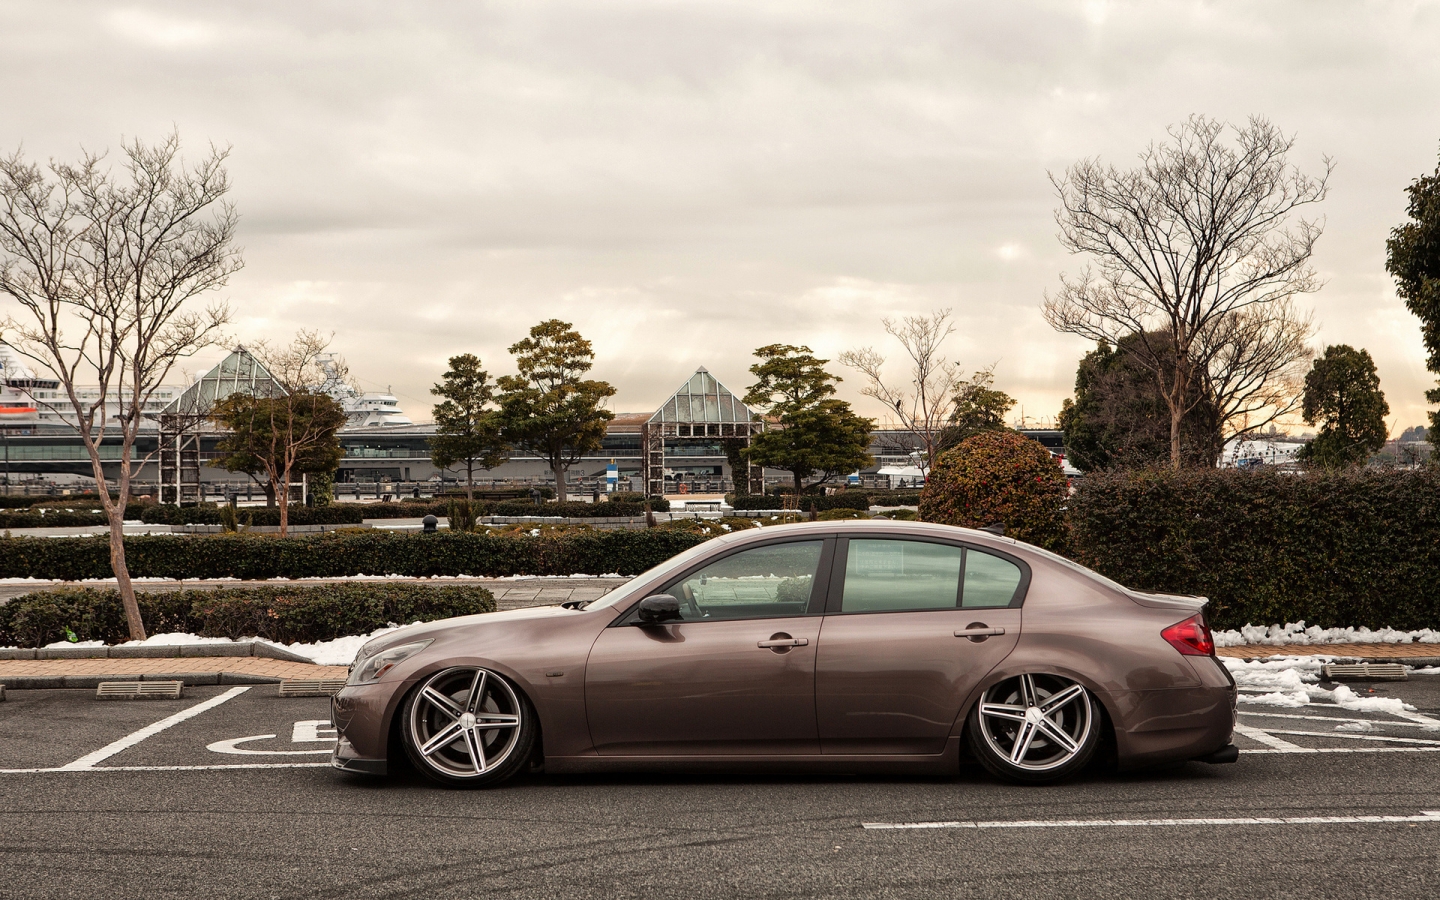 Tuned G35 Infiniti Side for 1440 x 900 widescreen resolution